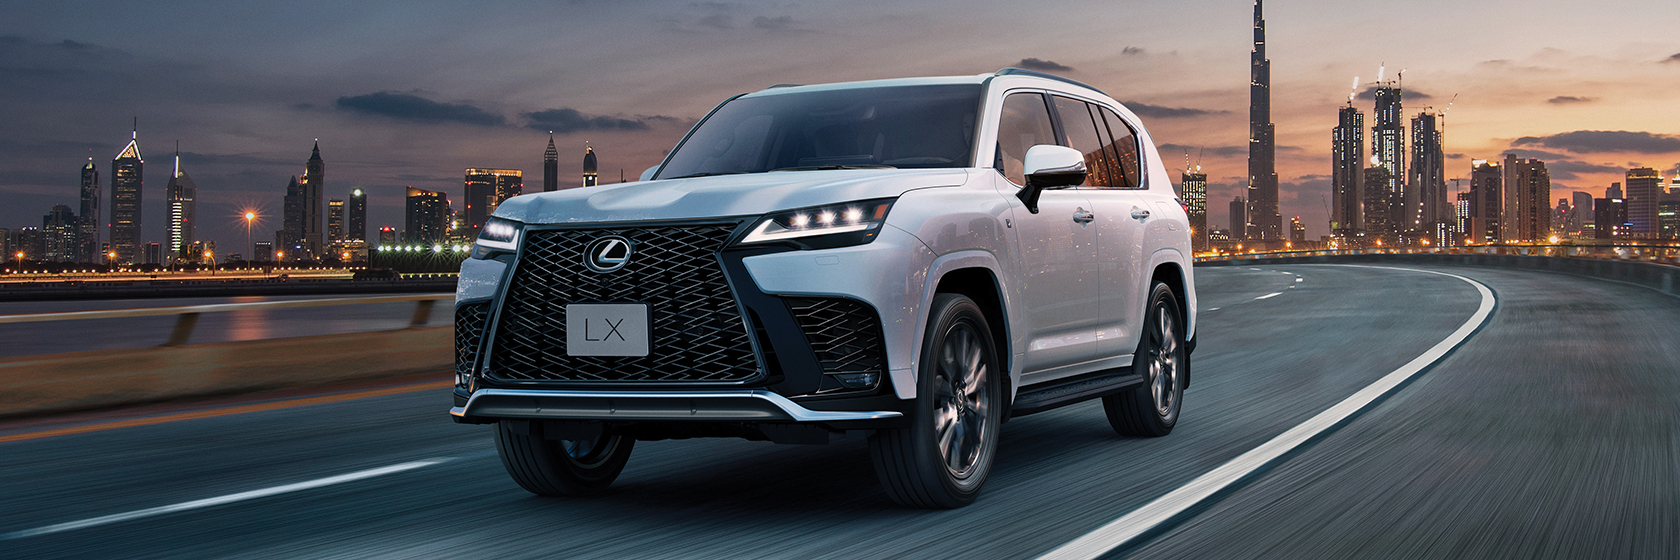 top-5-features-about-the-all-new-2022-lx-luxury-suv